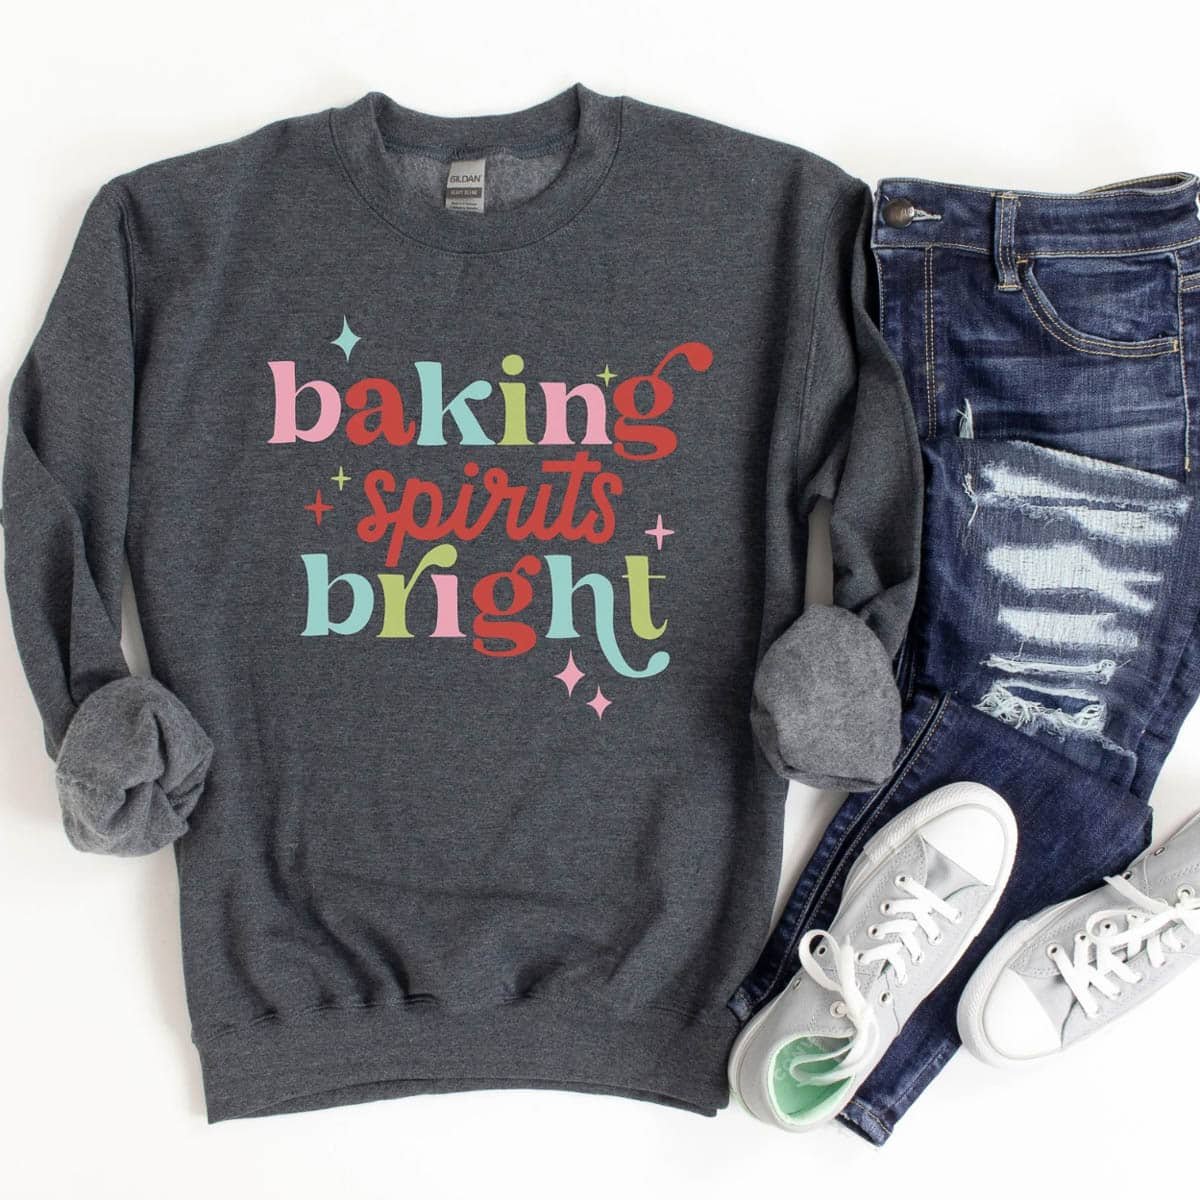 baking spirits bright gray sweatshirt pictured with white sneakers and jeans.